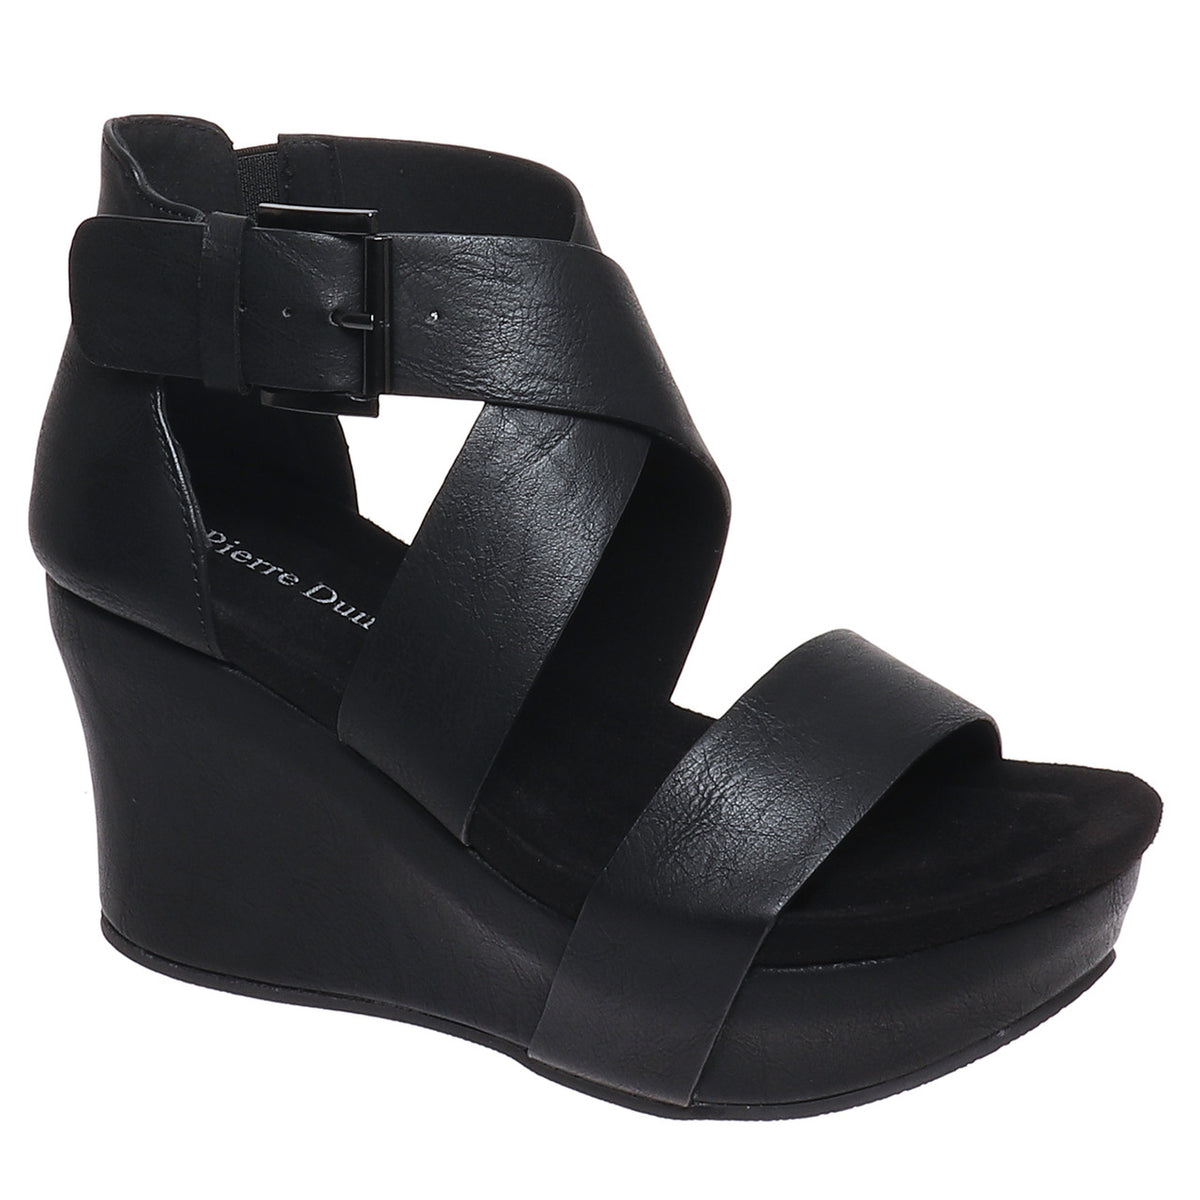 Hester Wedge Shoe with Adjustable Straps